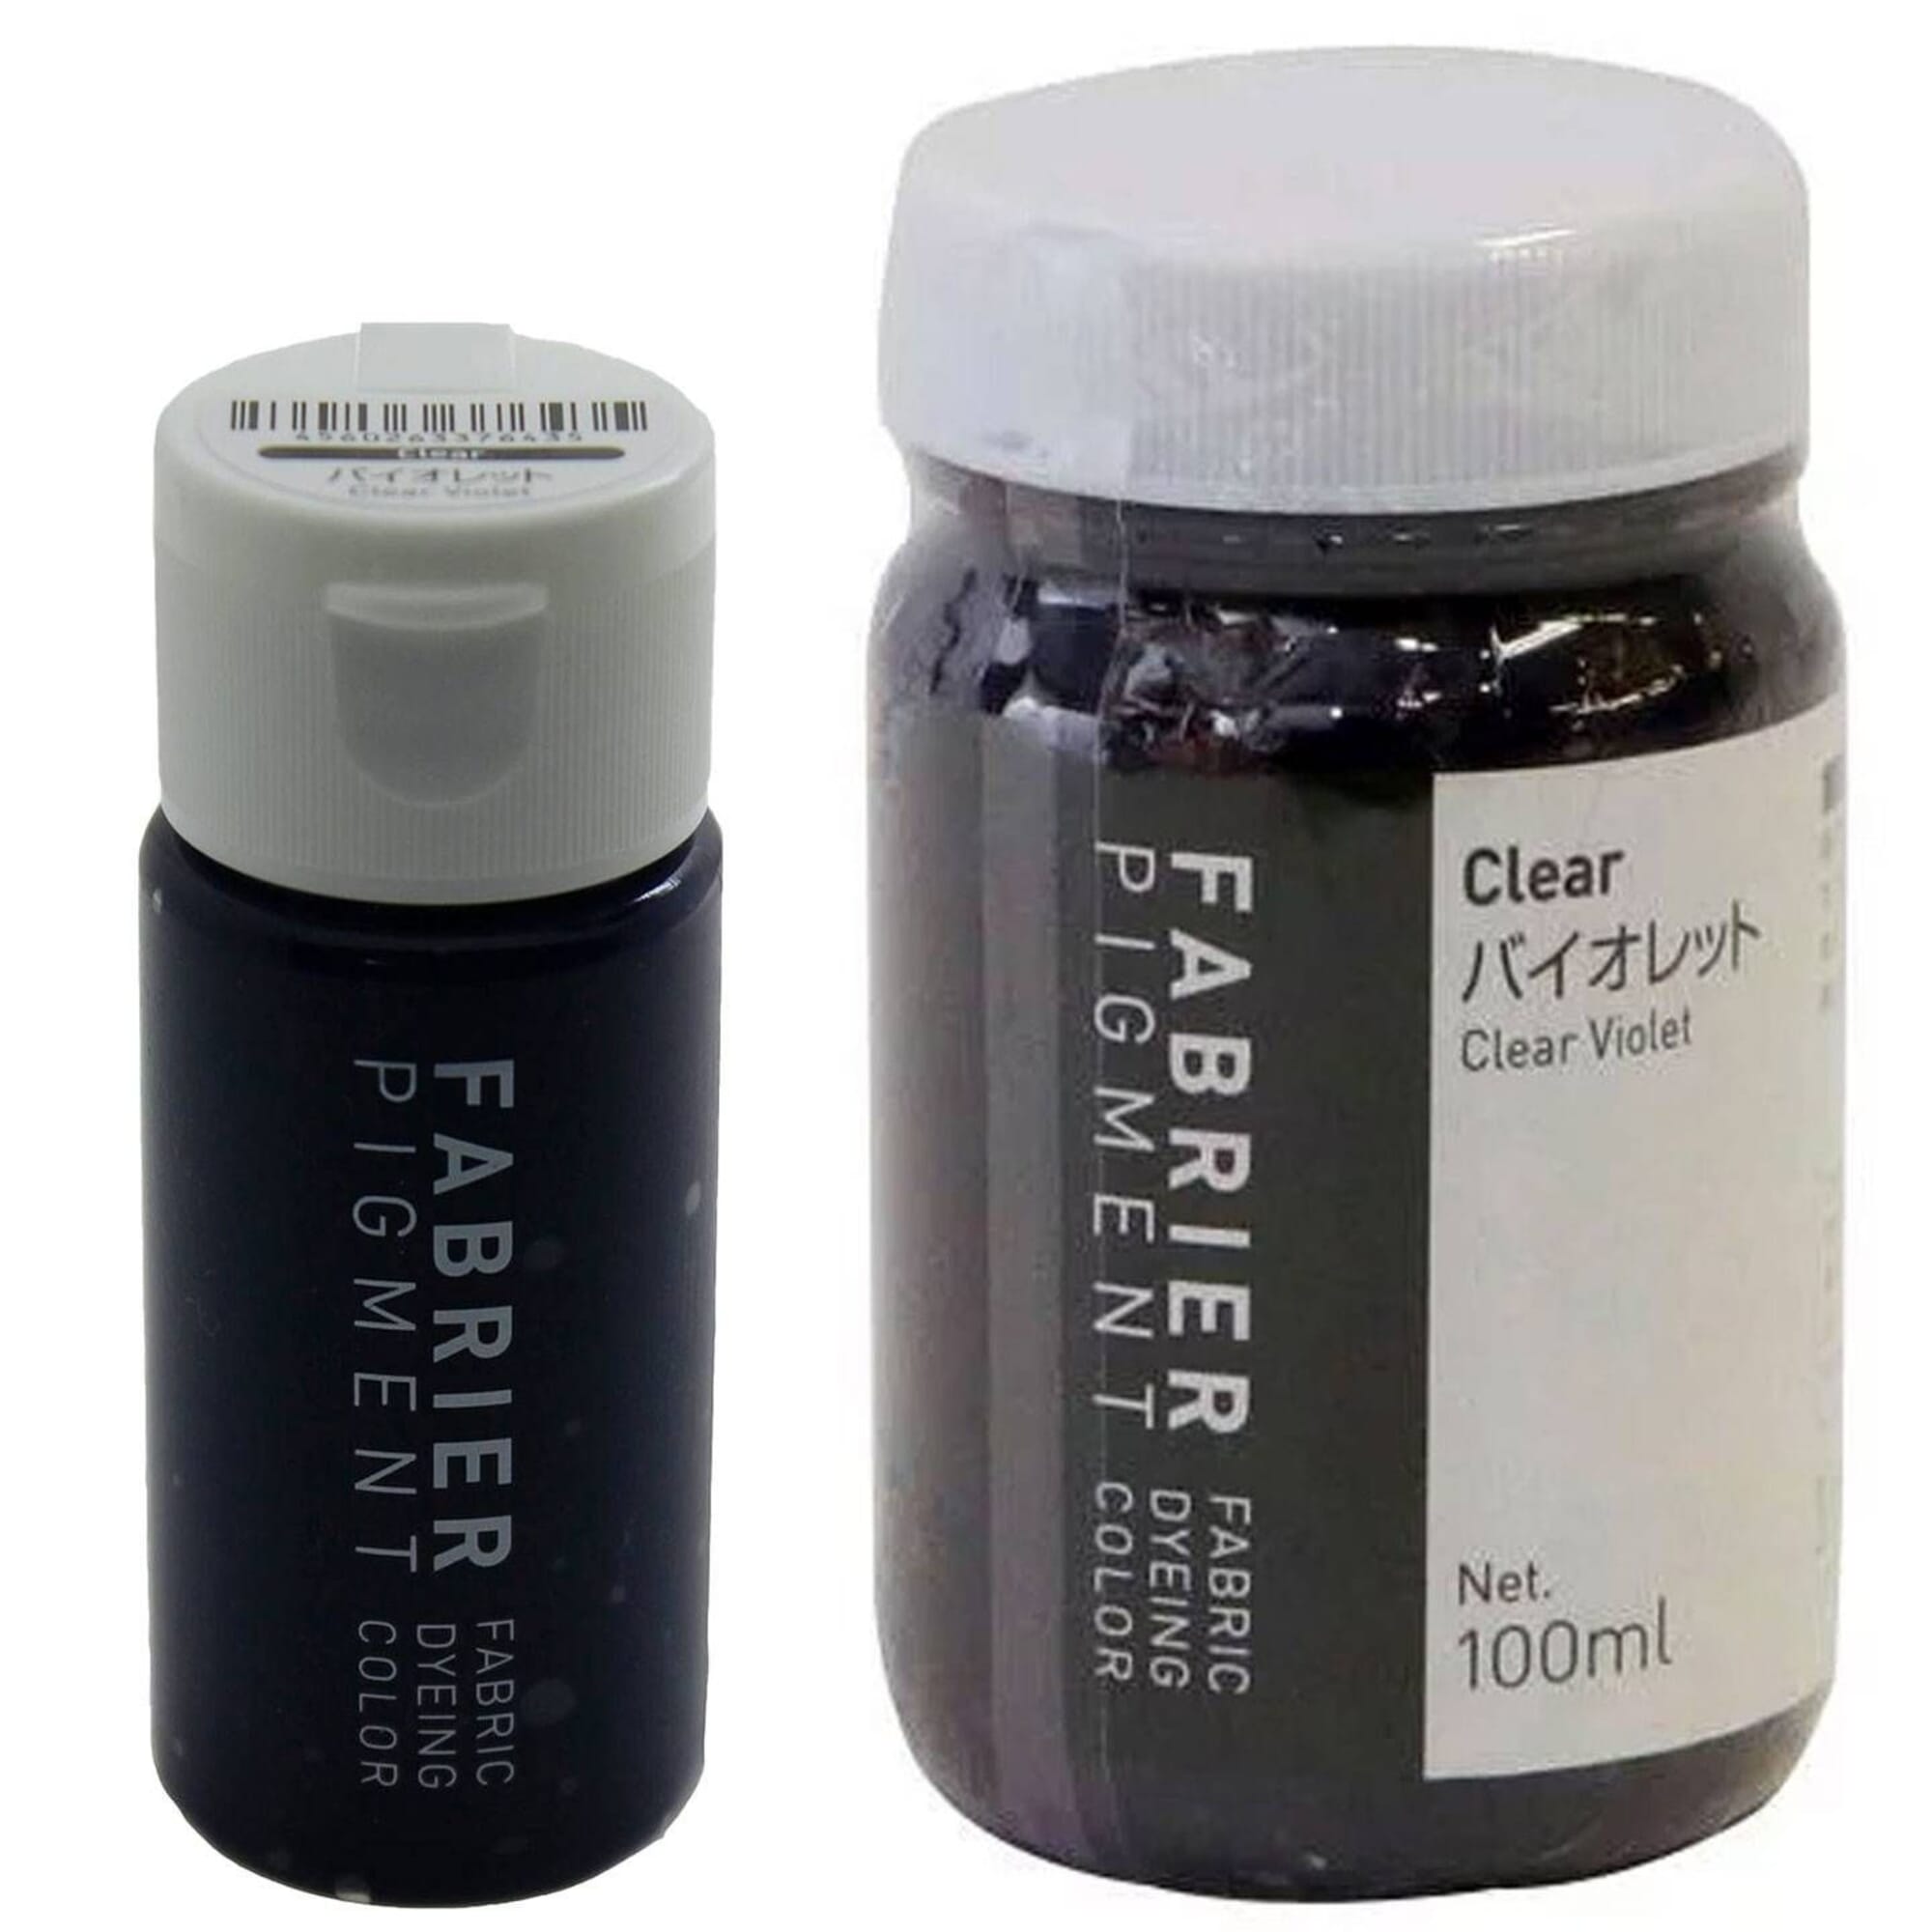 Seiwa Leathercraft Fabrier Clear Violet Leather Textile Color Dye 35ml & 100ml Water-Based Acrylic Paint, for Dyeing Fabric Goods